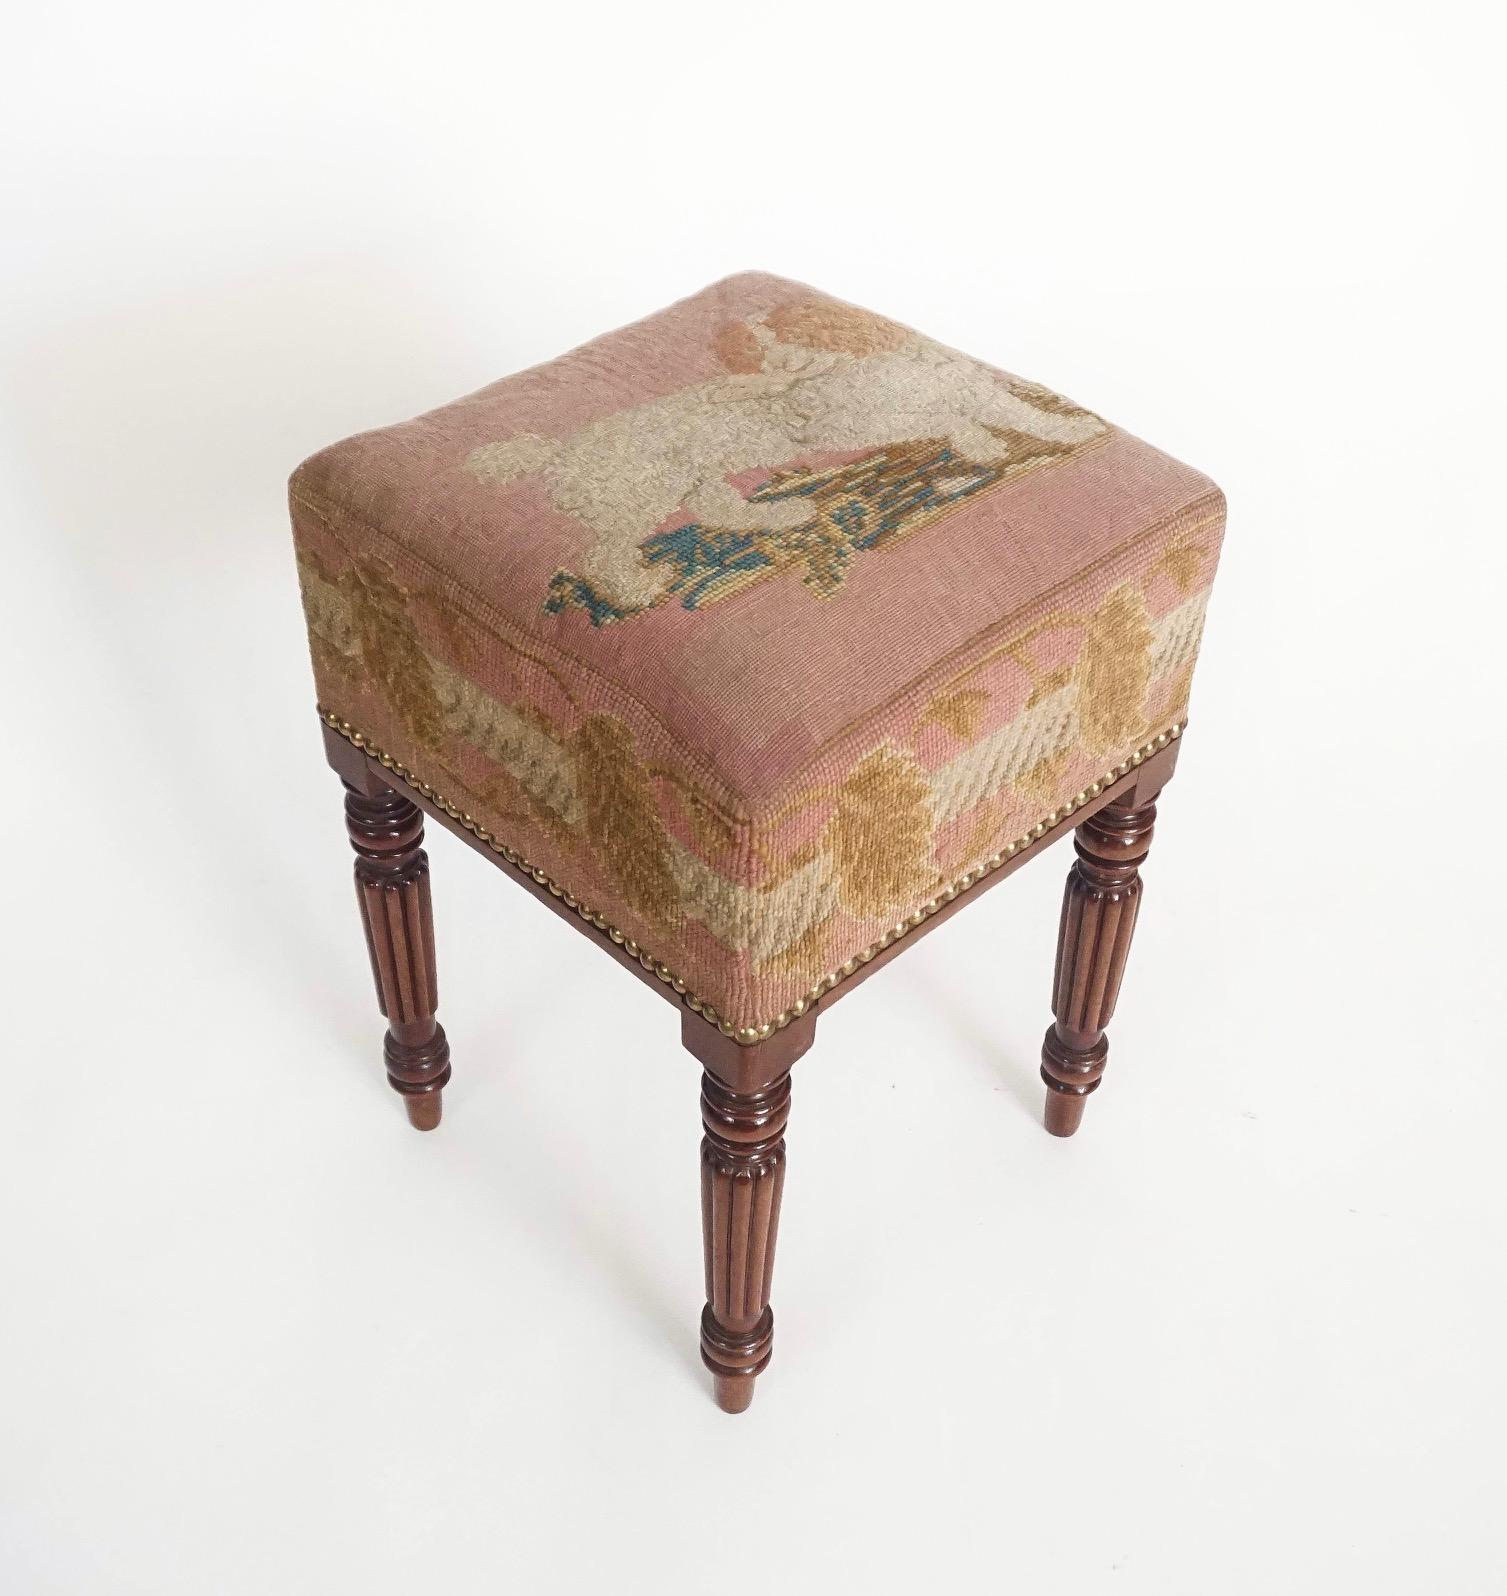 Hand-Crafted English Regency Mahogany Stool with Original Needlepoint of a Spaniel circa 1820 For Sale